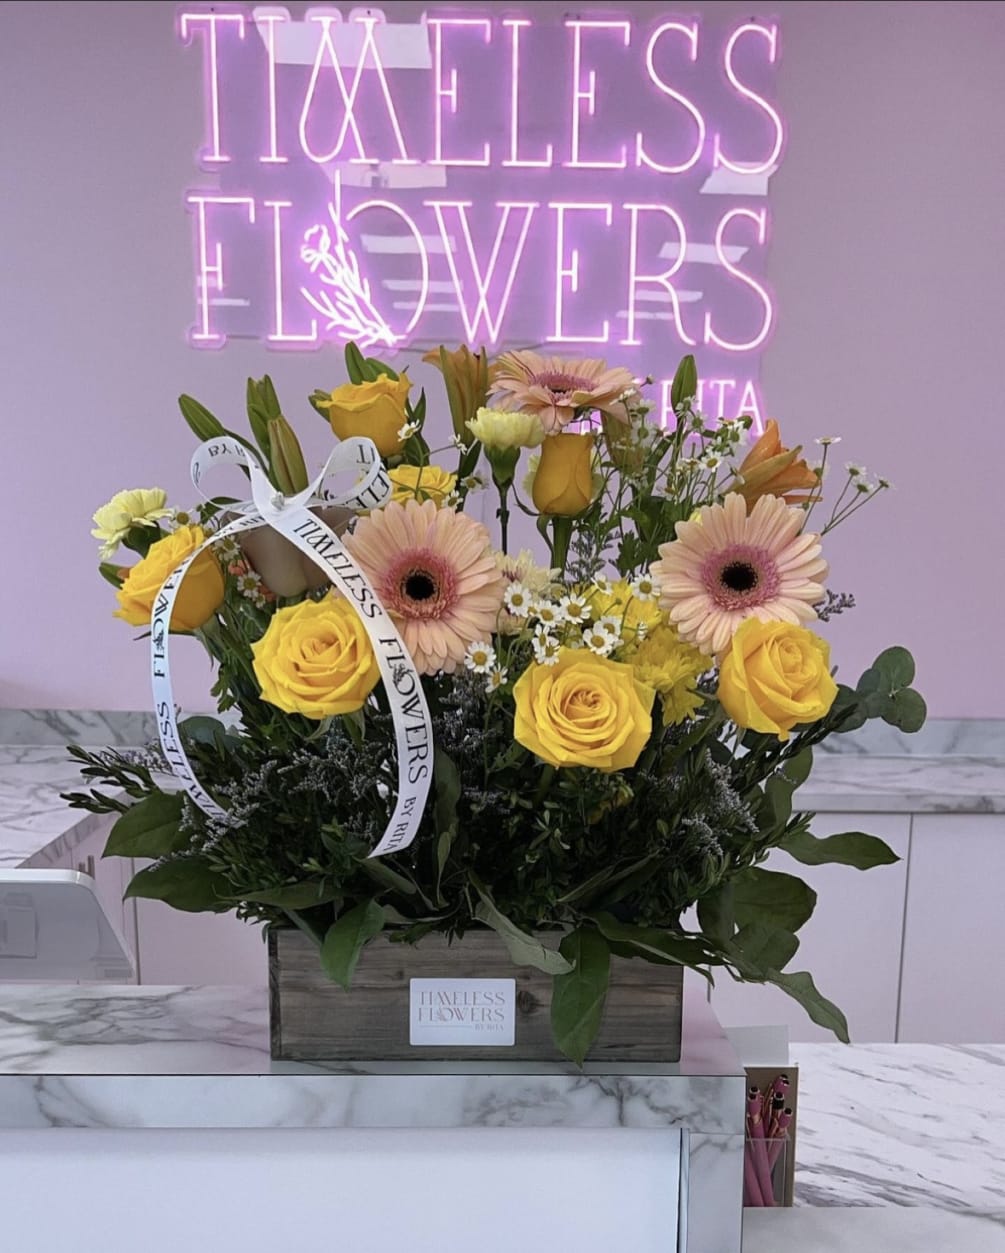 A unique array of pink and yellow florals with lush greenery and